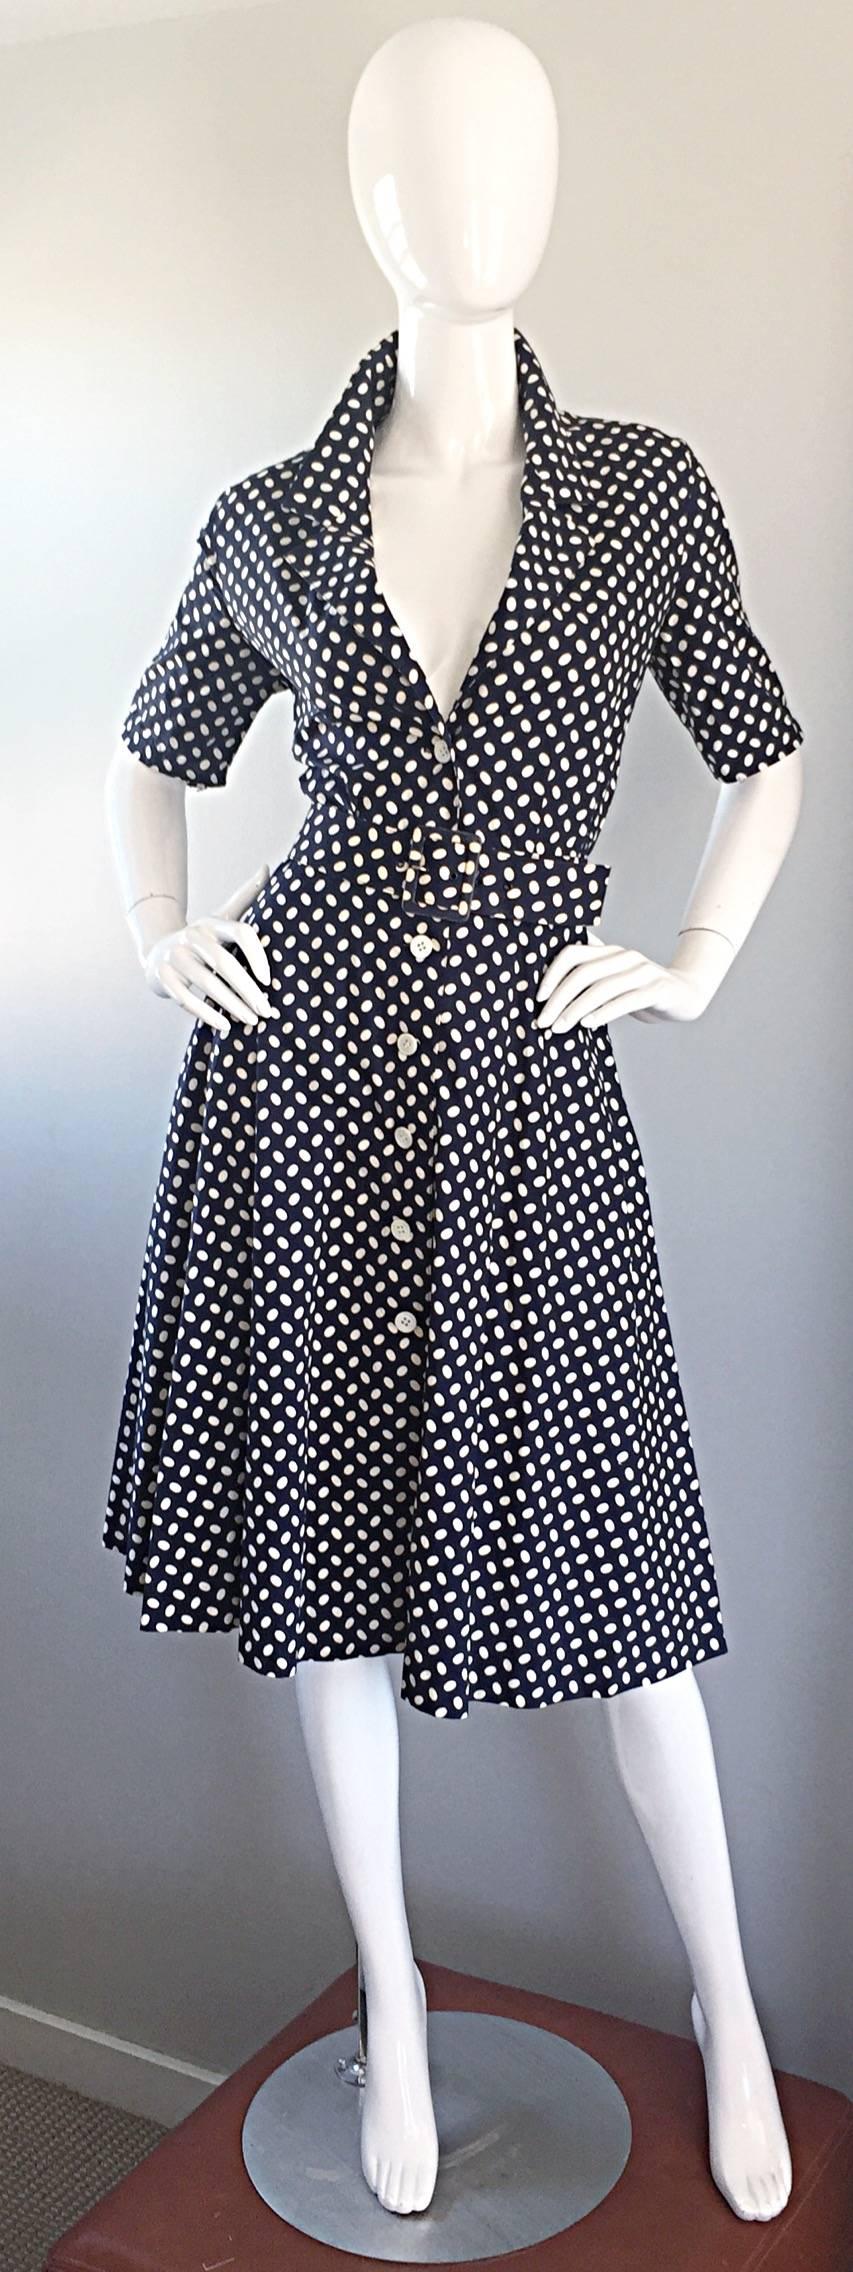 Adorable 1990s does 1950s French cotton dress by J. TIKTINER! Navy blue and white polka dots, with matching belt. Buttons up the bodice. Full skirt looks fantastic with movement, and on the dance floor (could also accommodate a crinoline for an